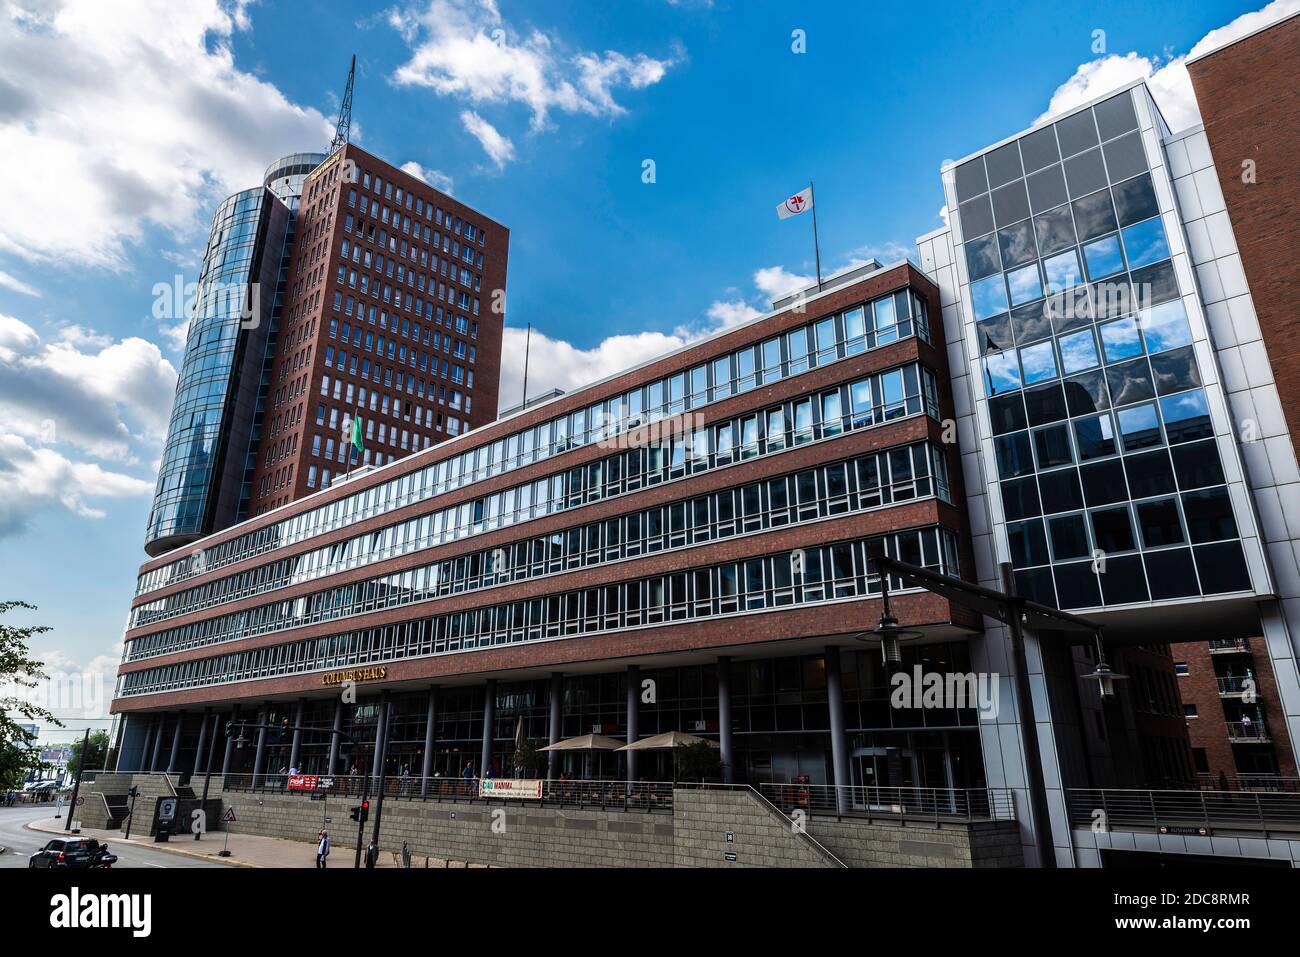 Hamburg, Germany - August 21, 2019: Hanseatic Trade Center (HTC), modern office building with people around in the neighborhood of HafenCity in the po Stock Photo